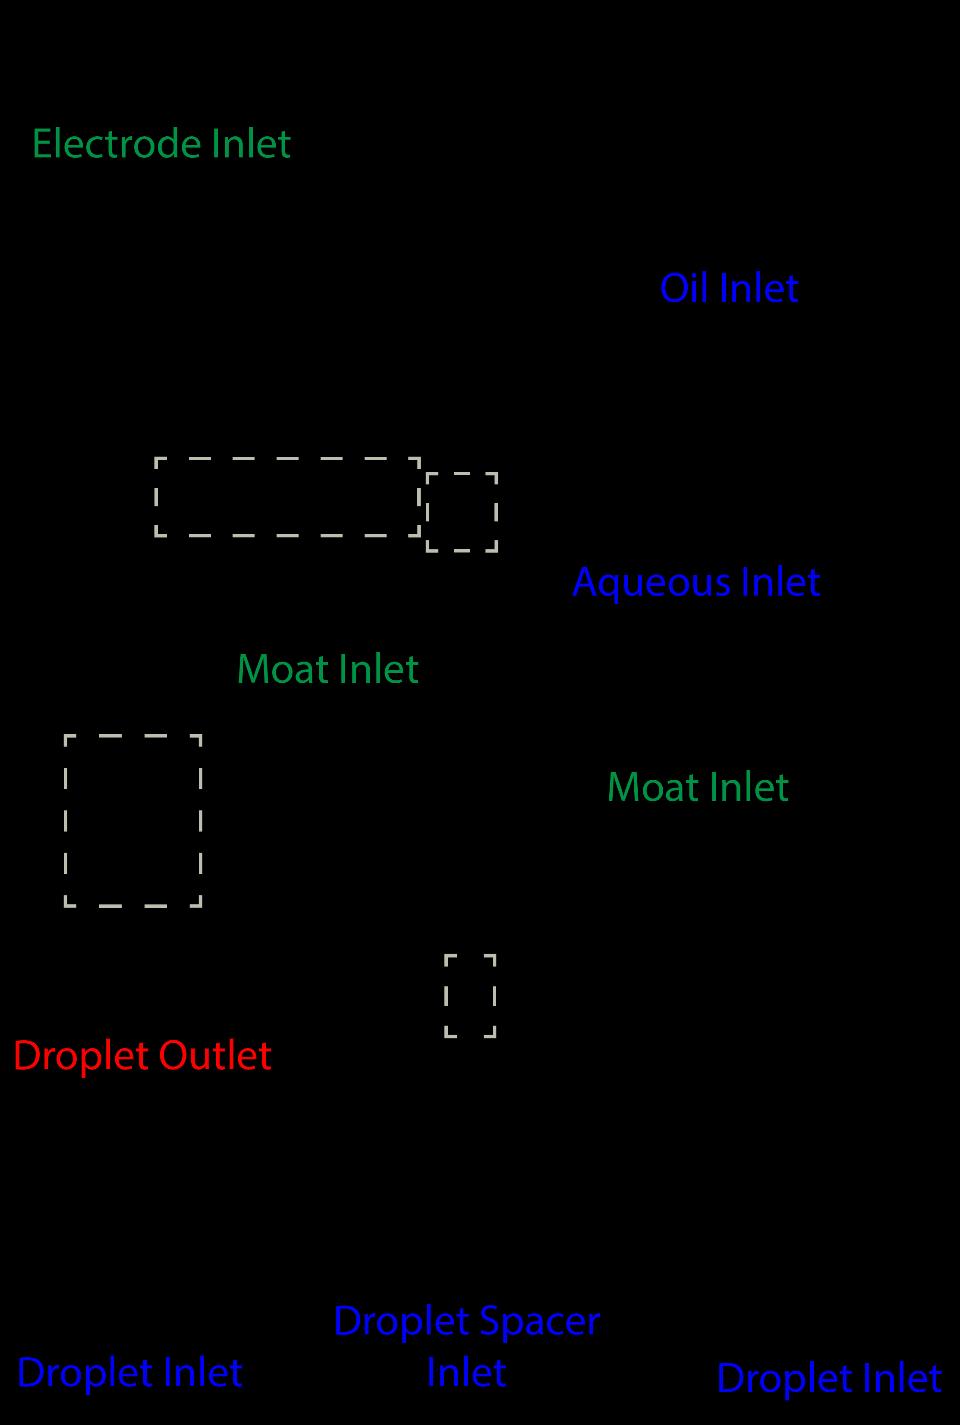 Supplementary Figure 2. Schematic of the barcode merging device which merges two small drops with one large drop then splits the large drop into 4 smaller drops.